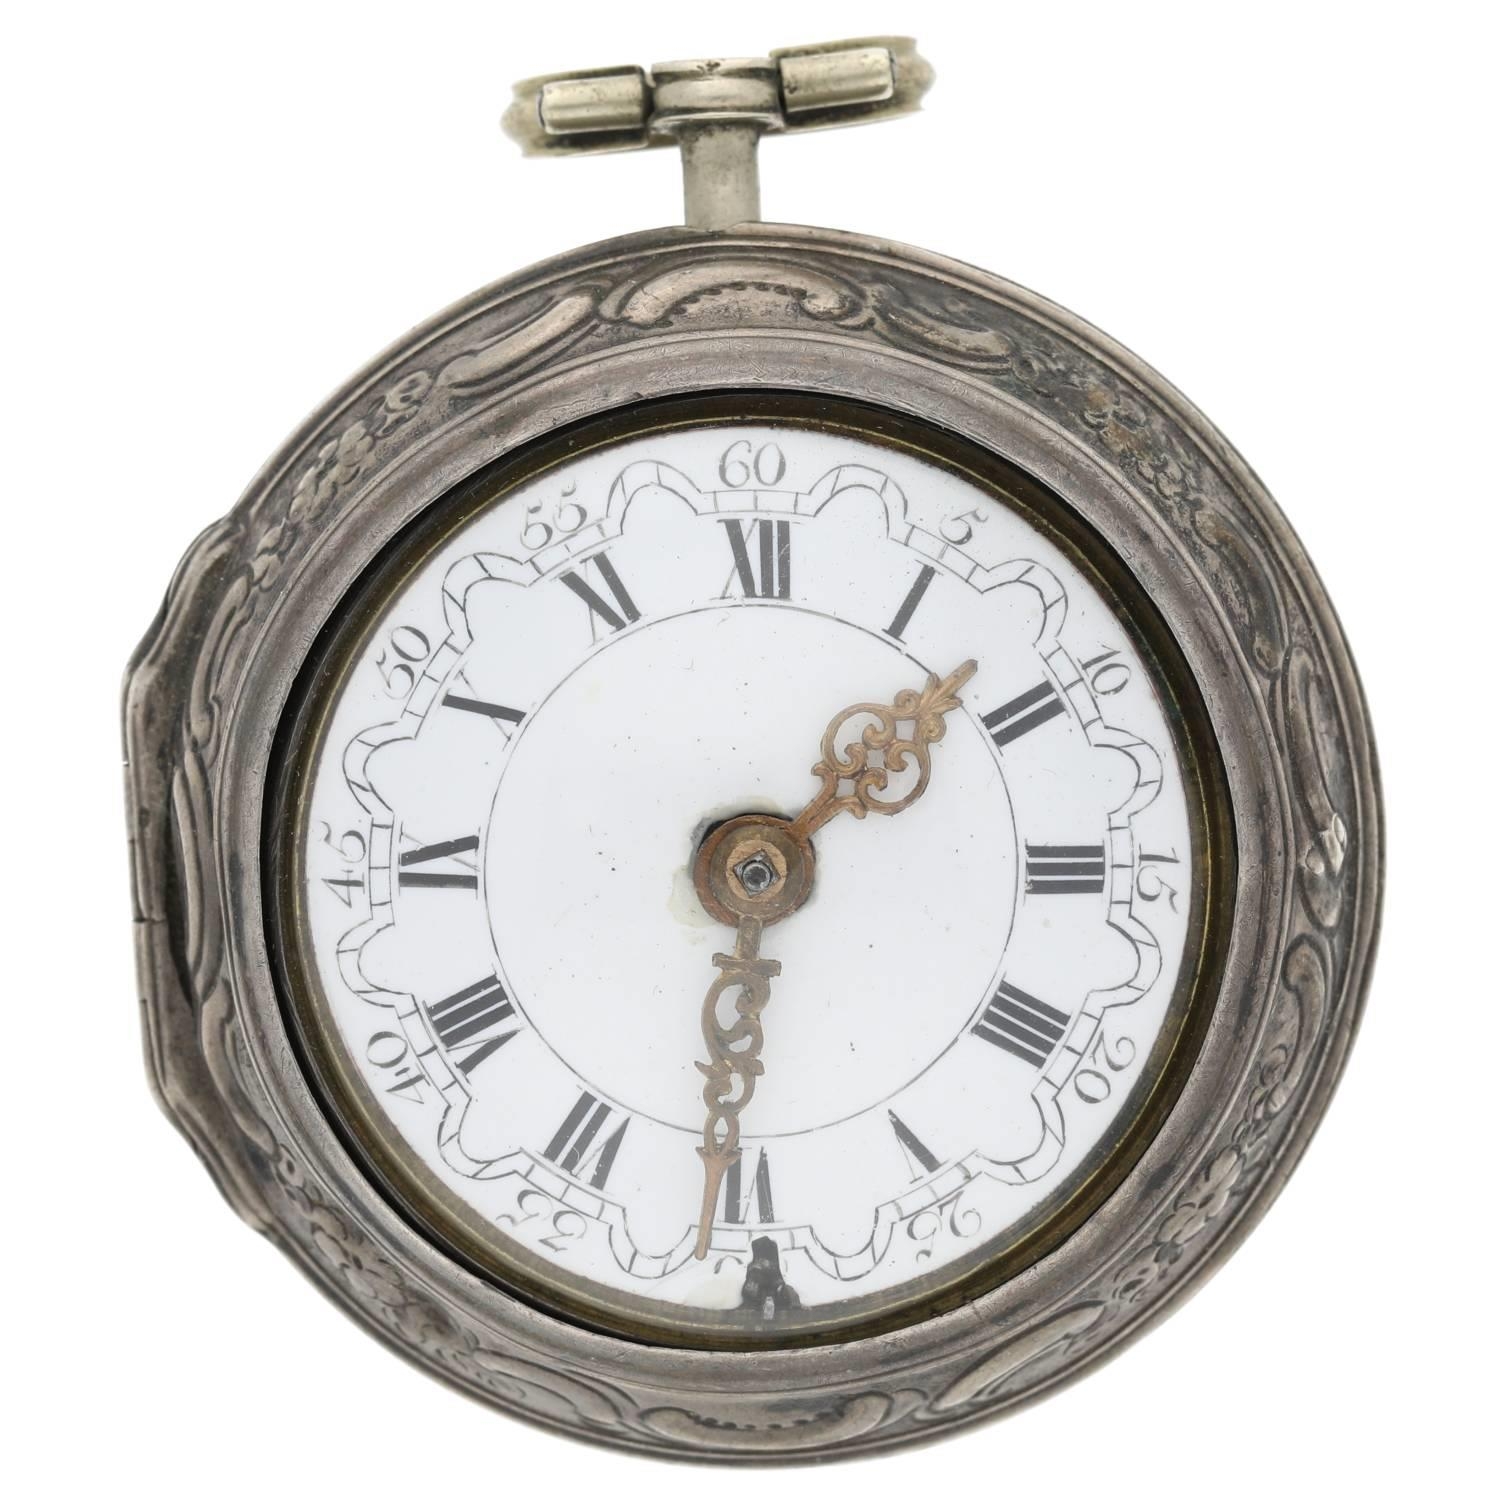 Mich Reanes, London - English 18th century repoussé silver pair cased verge pocket watch, London - Image 2 of 10